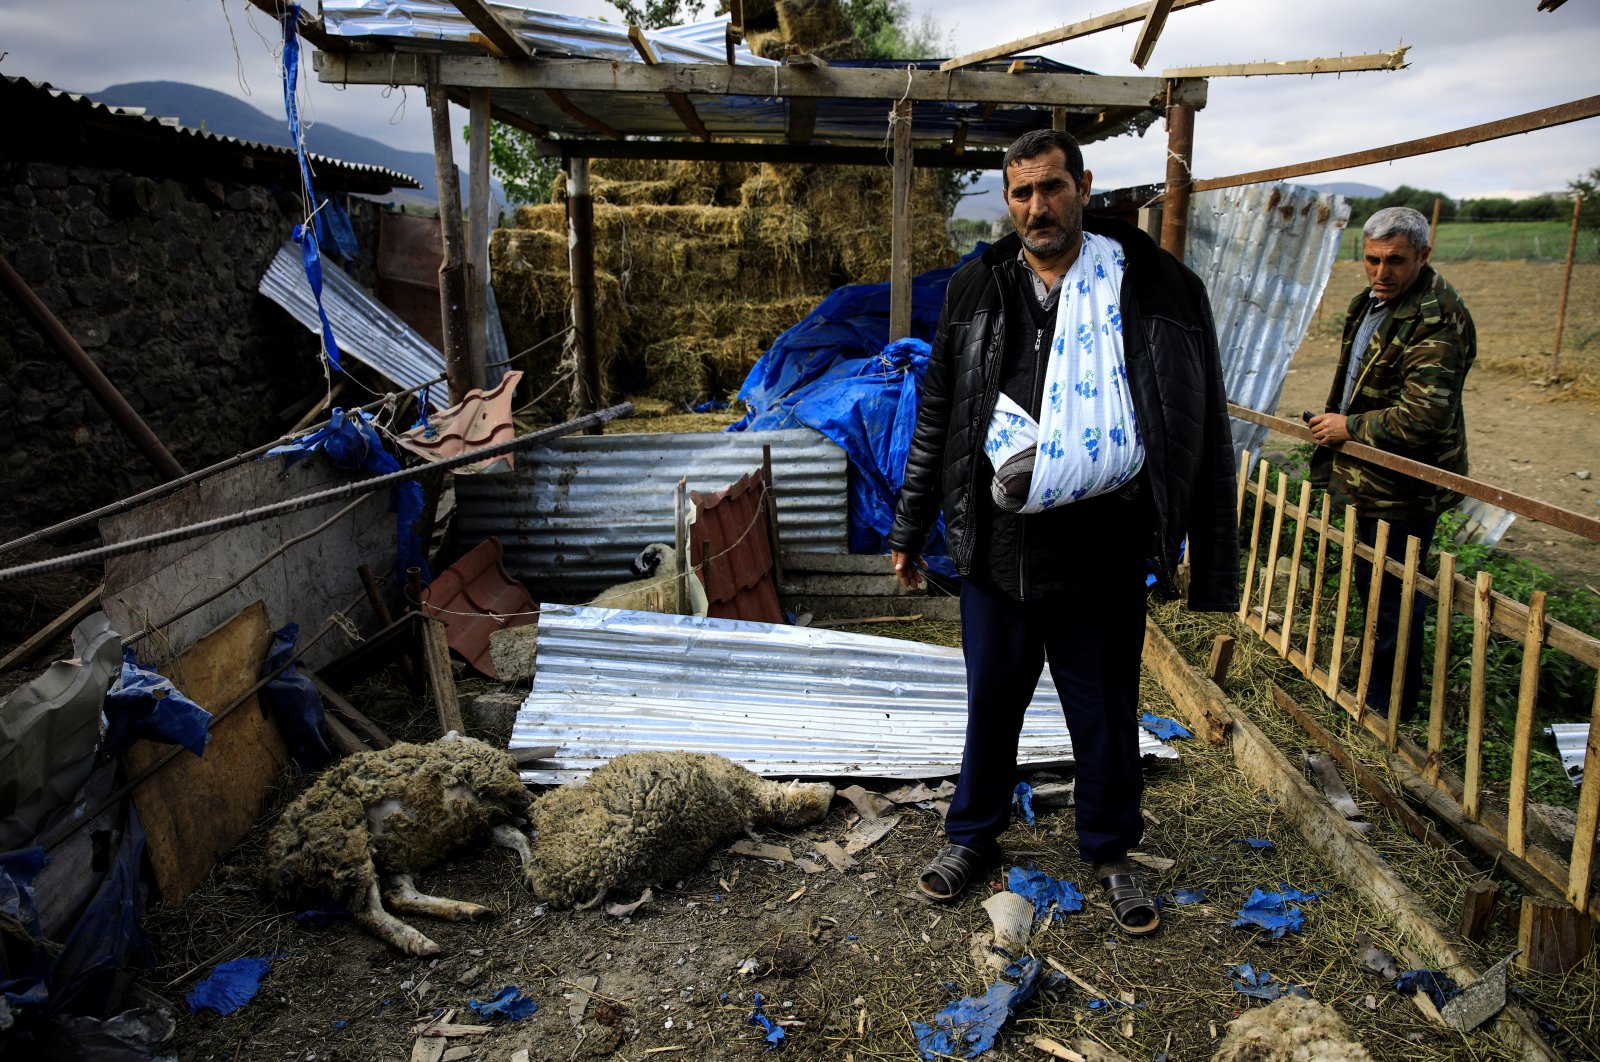 Wounded resident Ilyas Ahmedov stands next to his dead sheep at his farmhouse, which was hit by shelling during the military conflict over the Armenian-occupied region of Nagorno-Karabakh, in Qaraçınar village near the town of Goranboy, Azerbaijan, Oct. 8, 2020. (Reuters Photo)